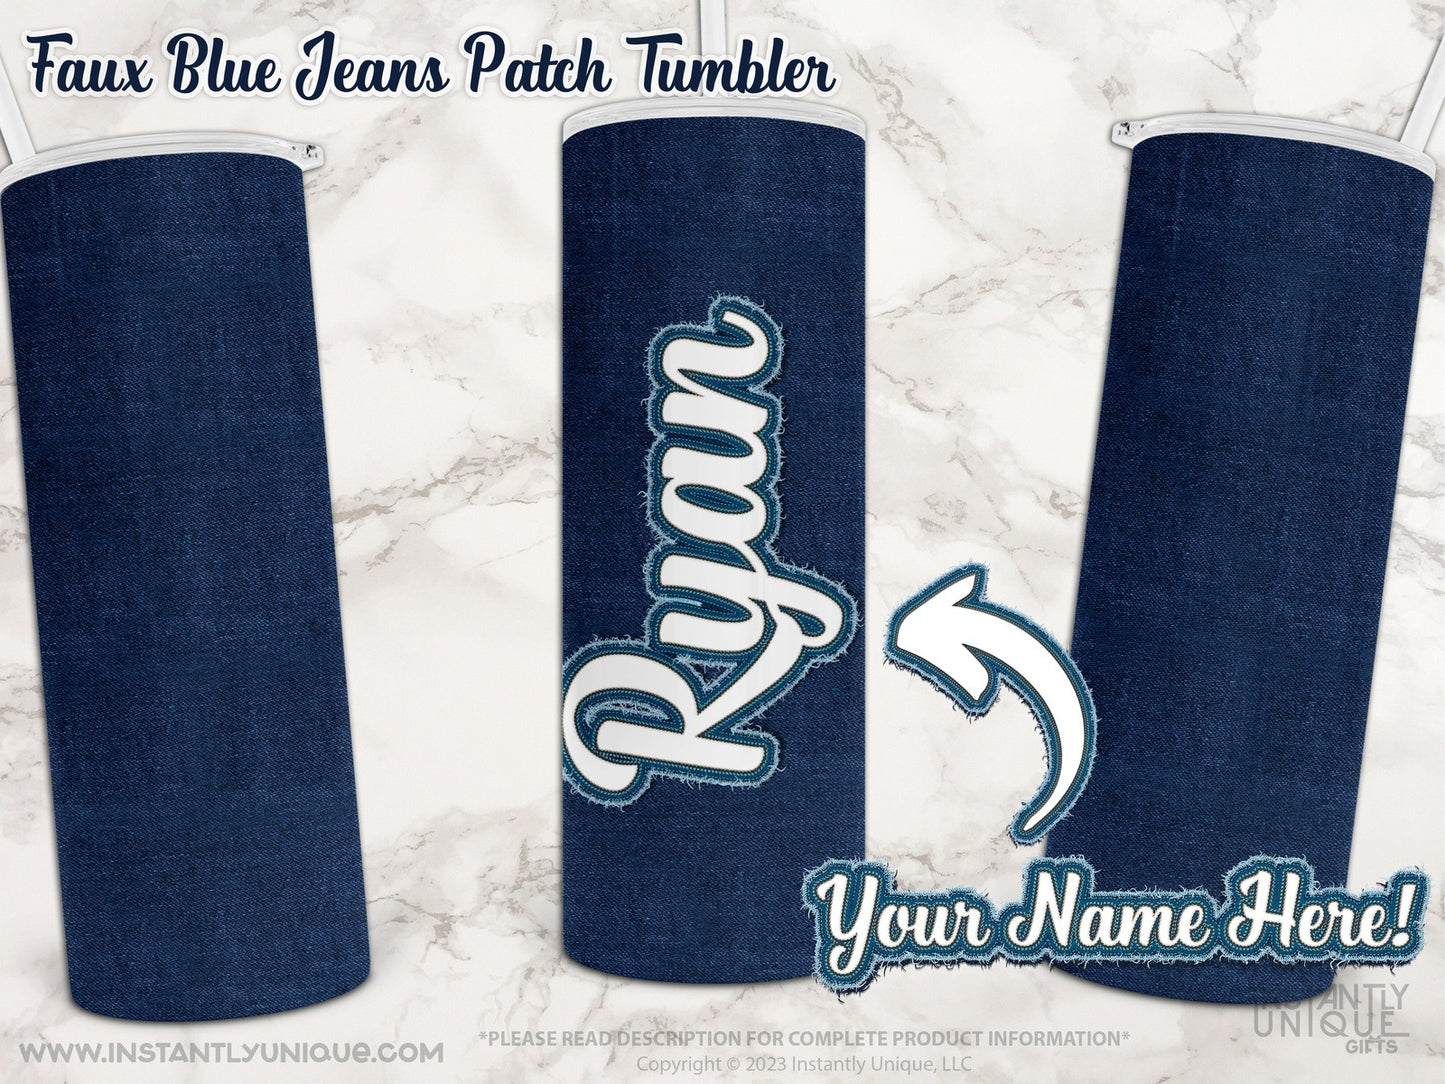 Faux Blue Jeans Tumbler with Custom Name Patch